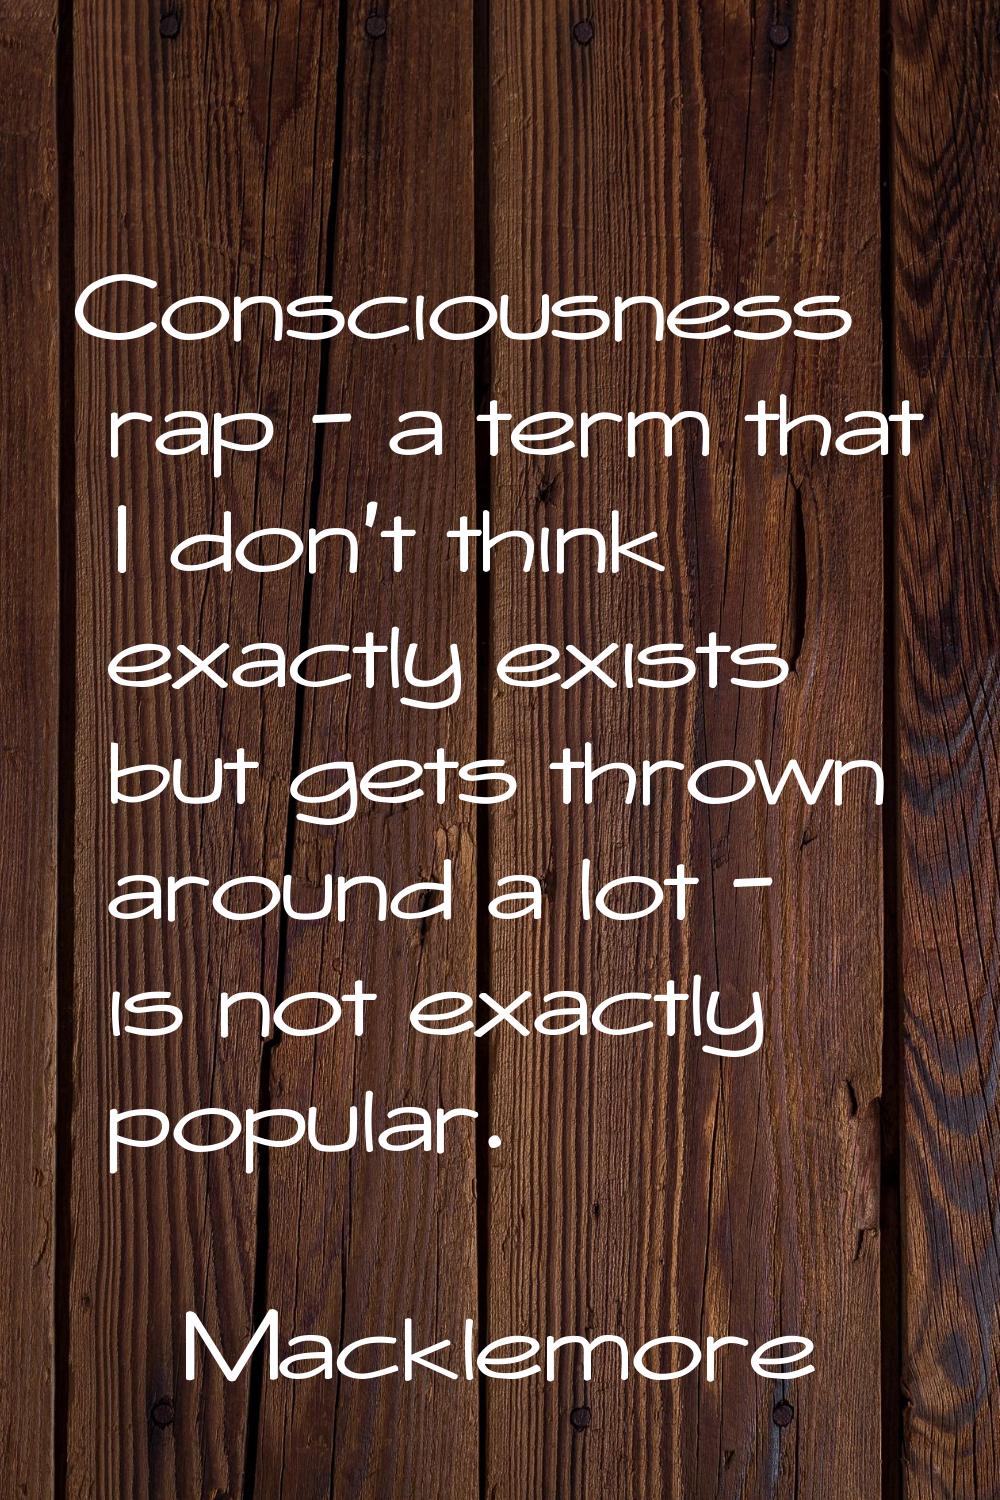 Consciousness rap - a term that I don't think exactly exists but gets thrown around a lot - is not 